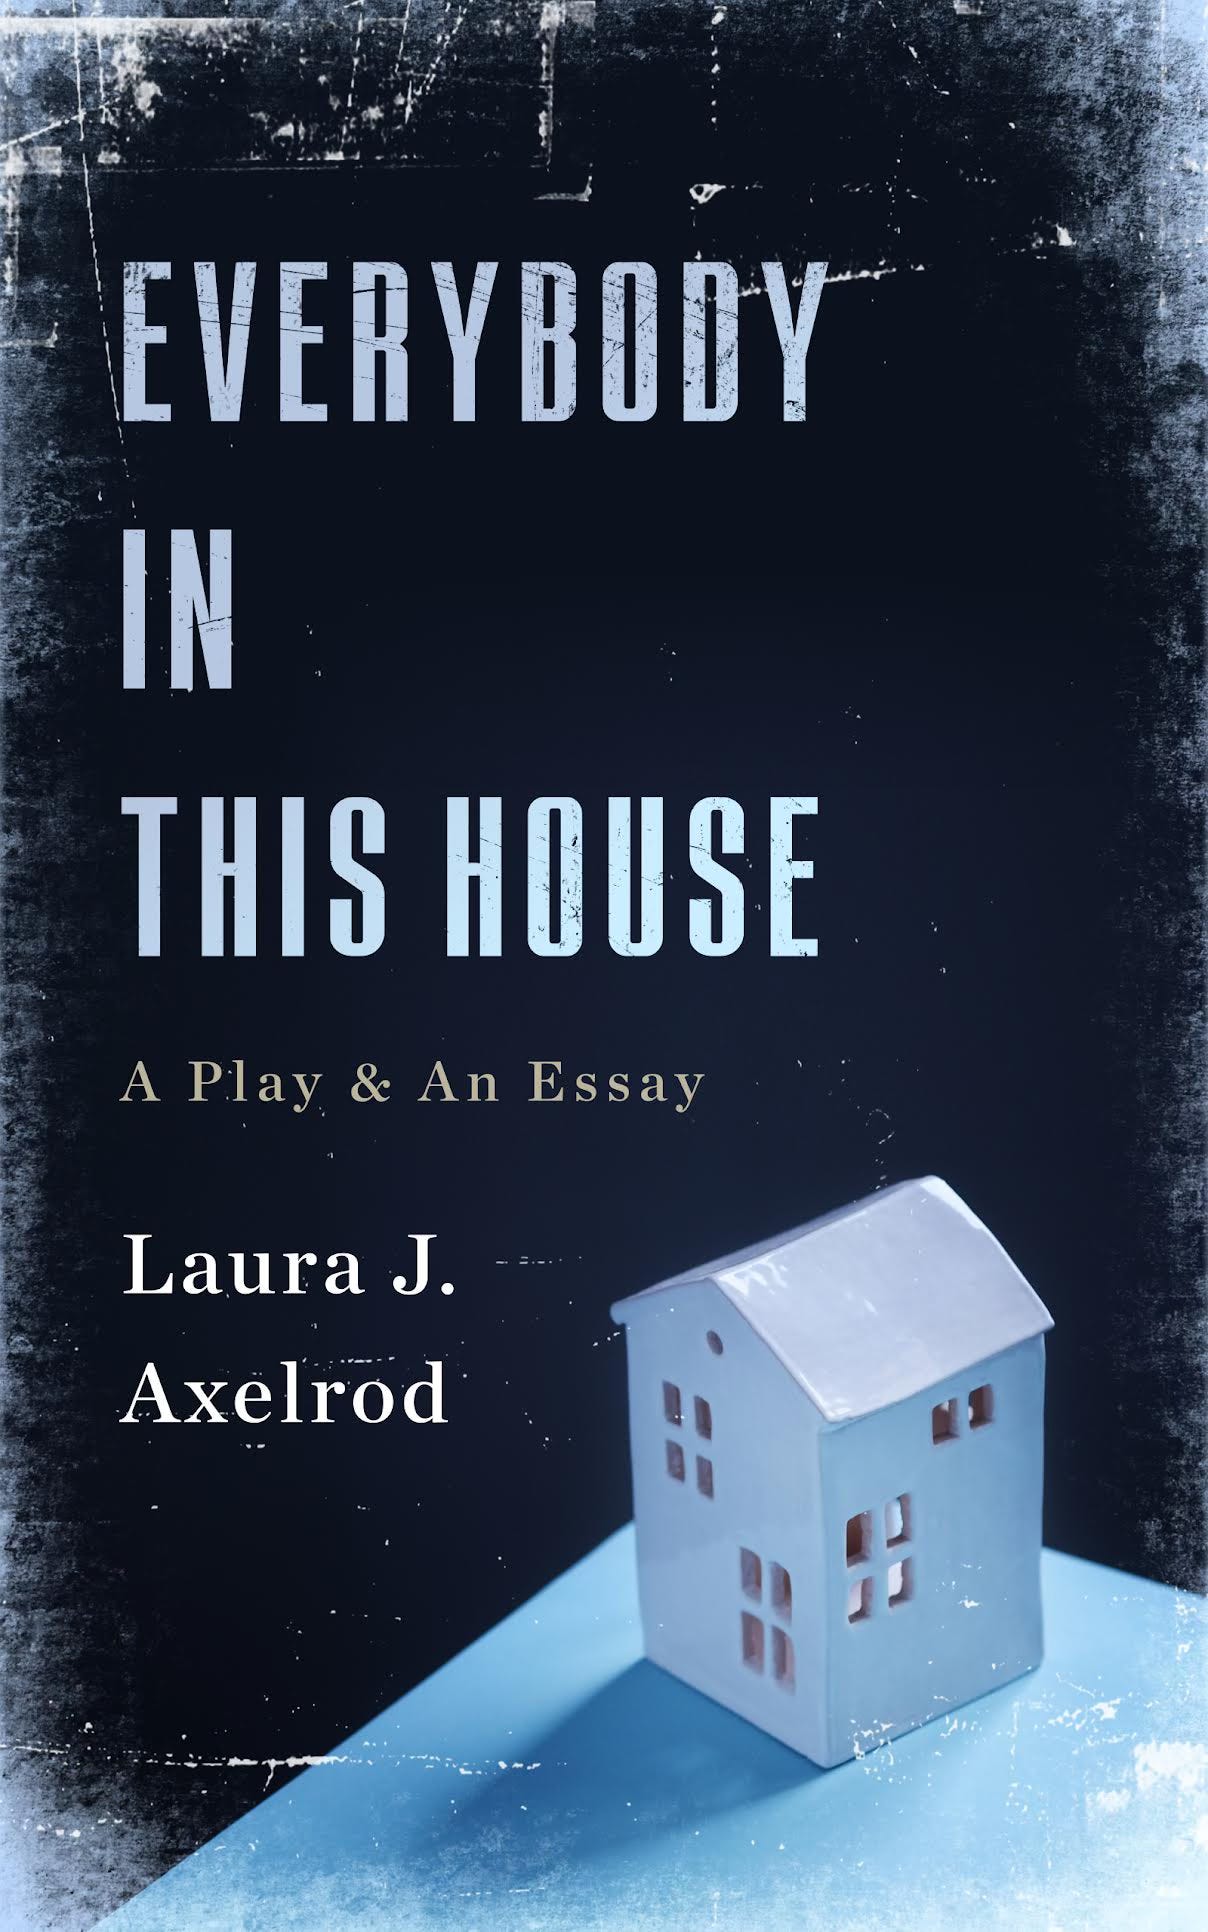 A book cover that looks worn with a wooden house on a table